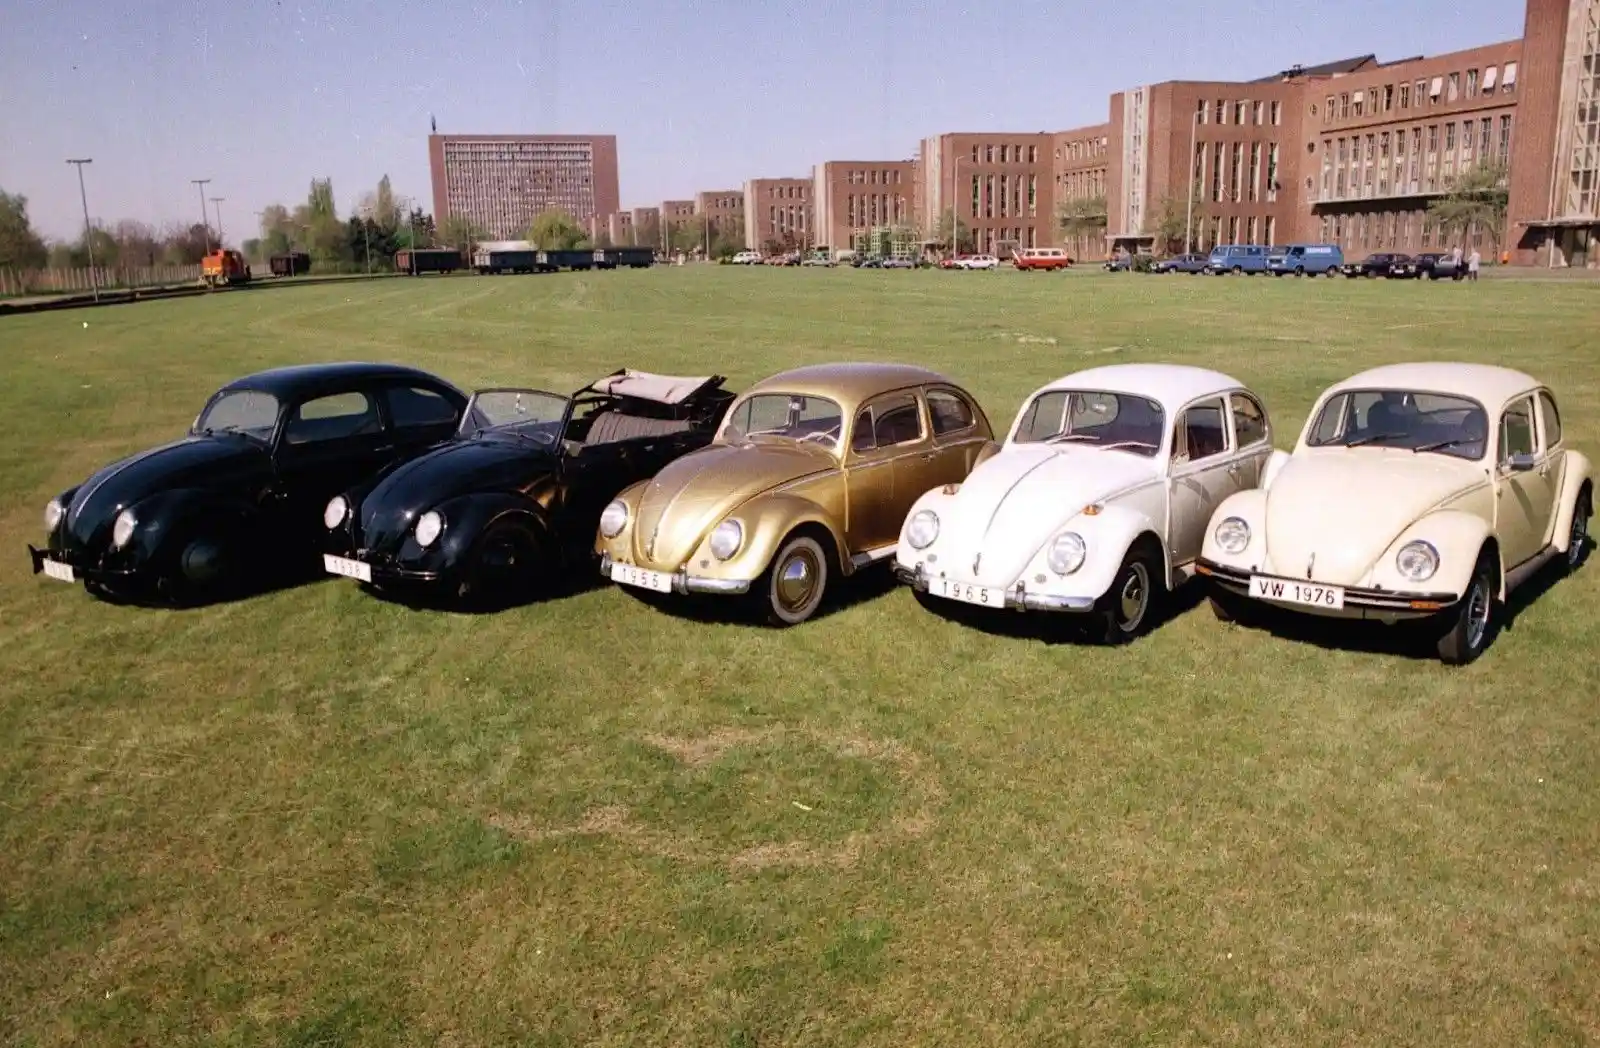 The Volkswagen Beetle through the ages. Image source: Plastics Today